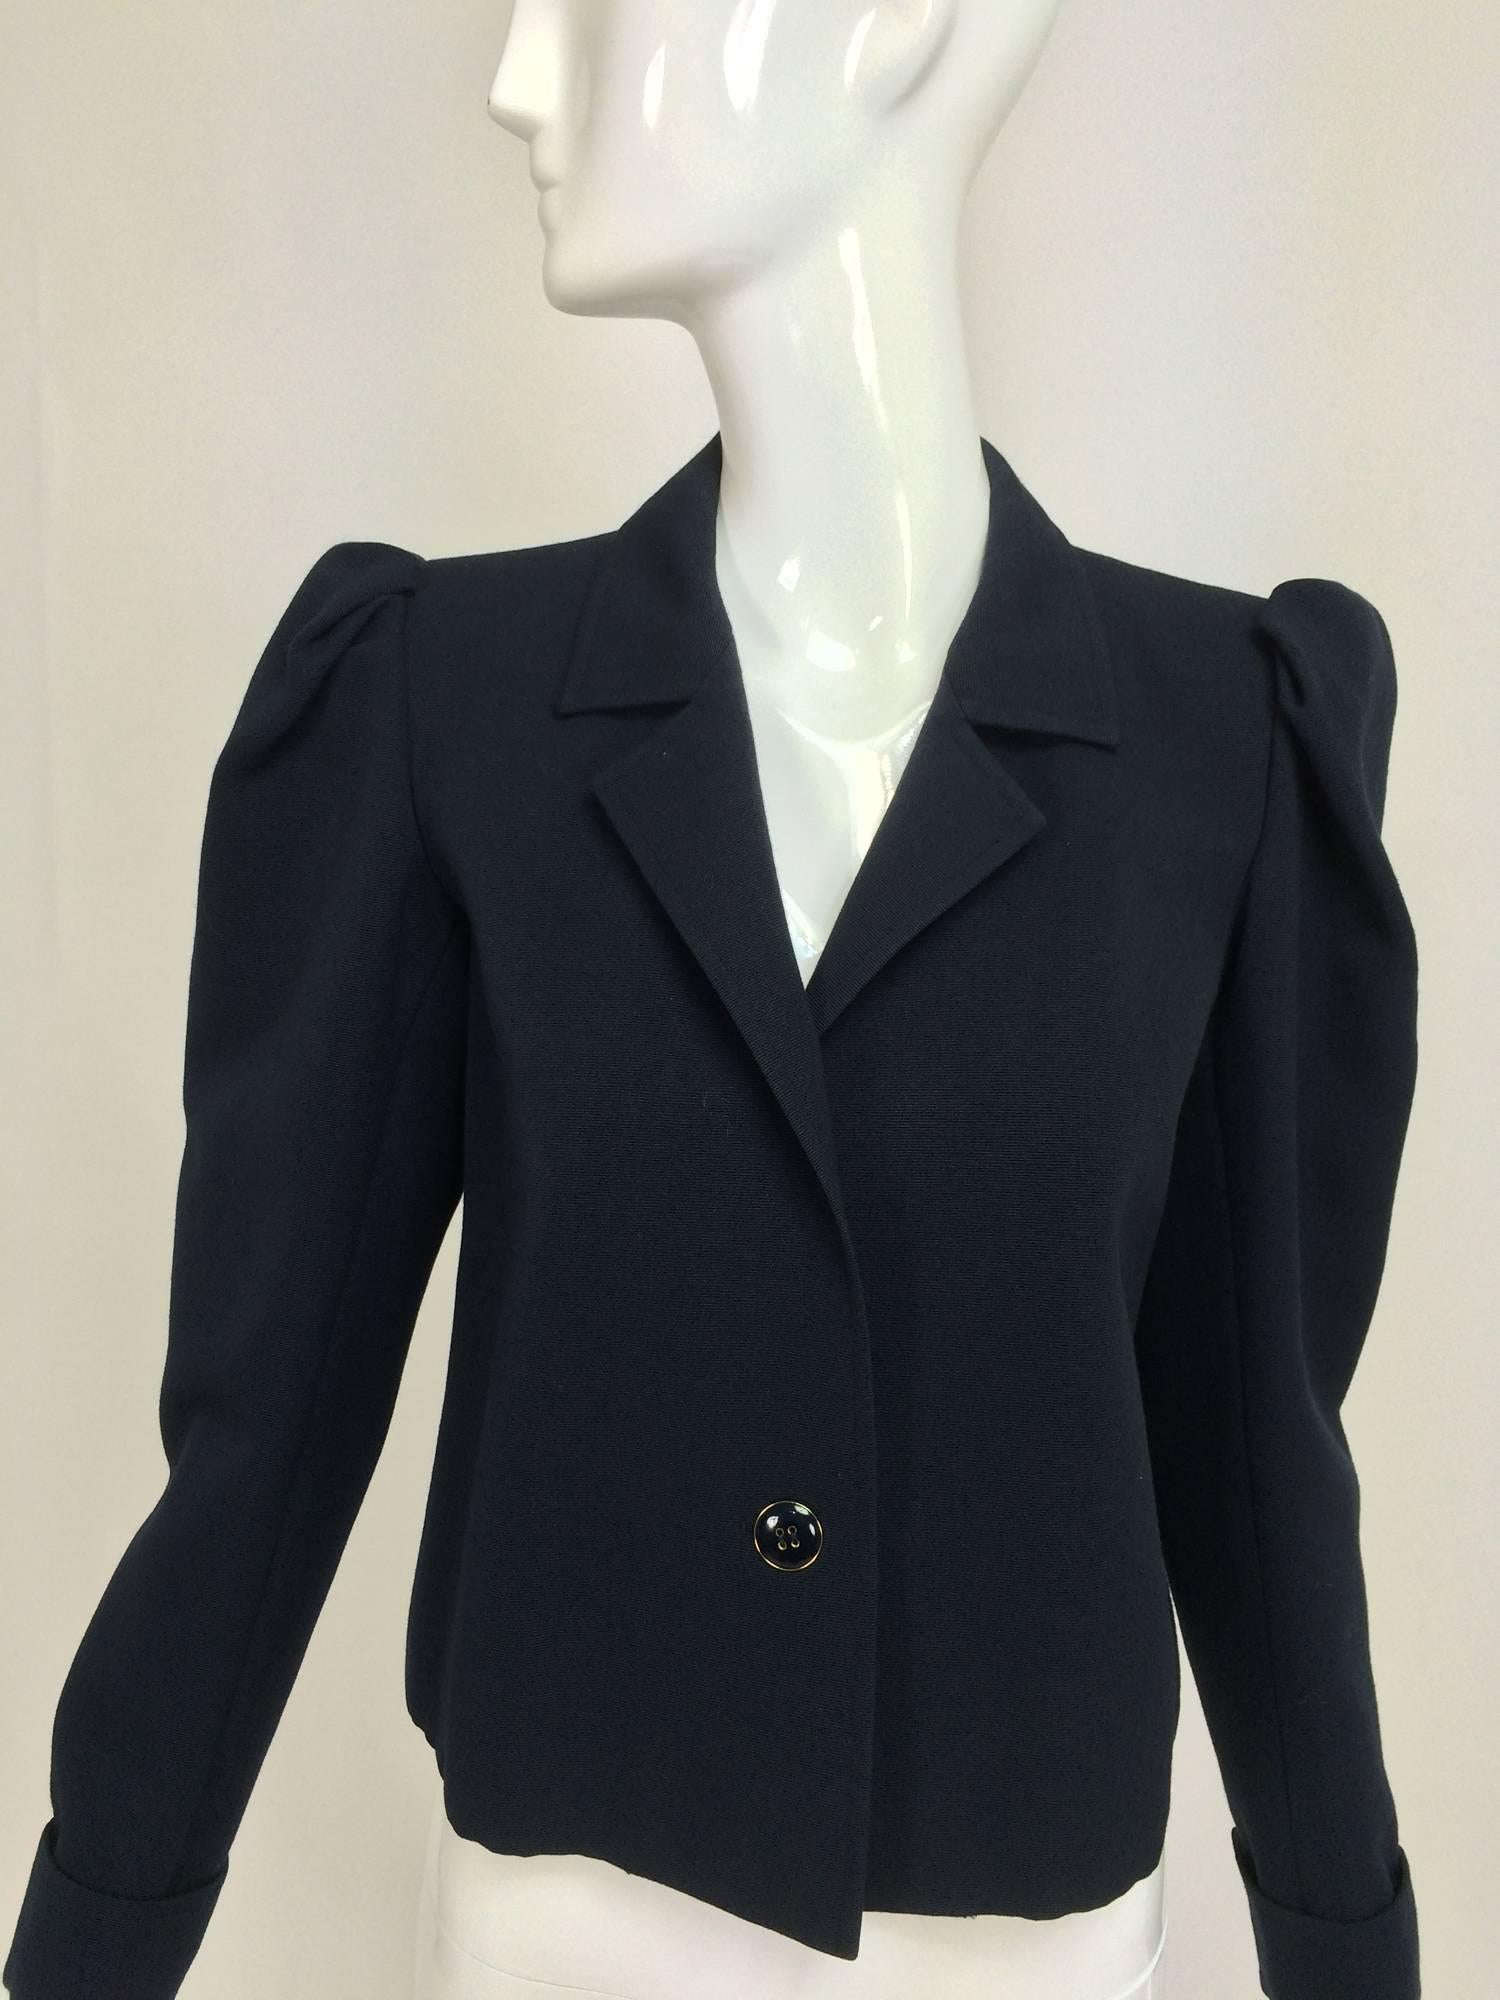 Yves St Laurent navy blue peaked shoulder cropped wool faille jacket 1980s...Great jacket for layering, cropped length, pleated peaked shoulder, the long sleeves have a turn back cuff with a hidden button...The narrow lapel jacket closes with a